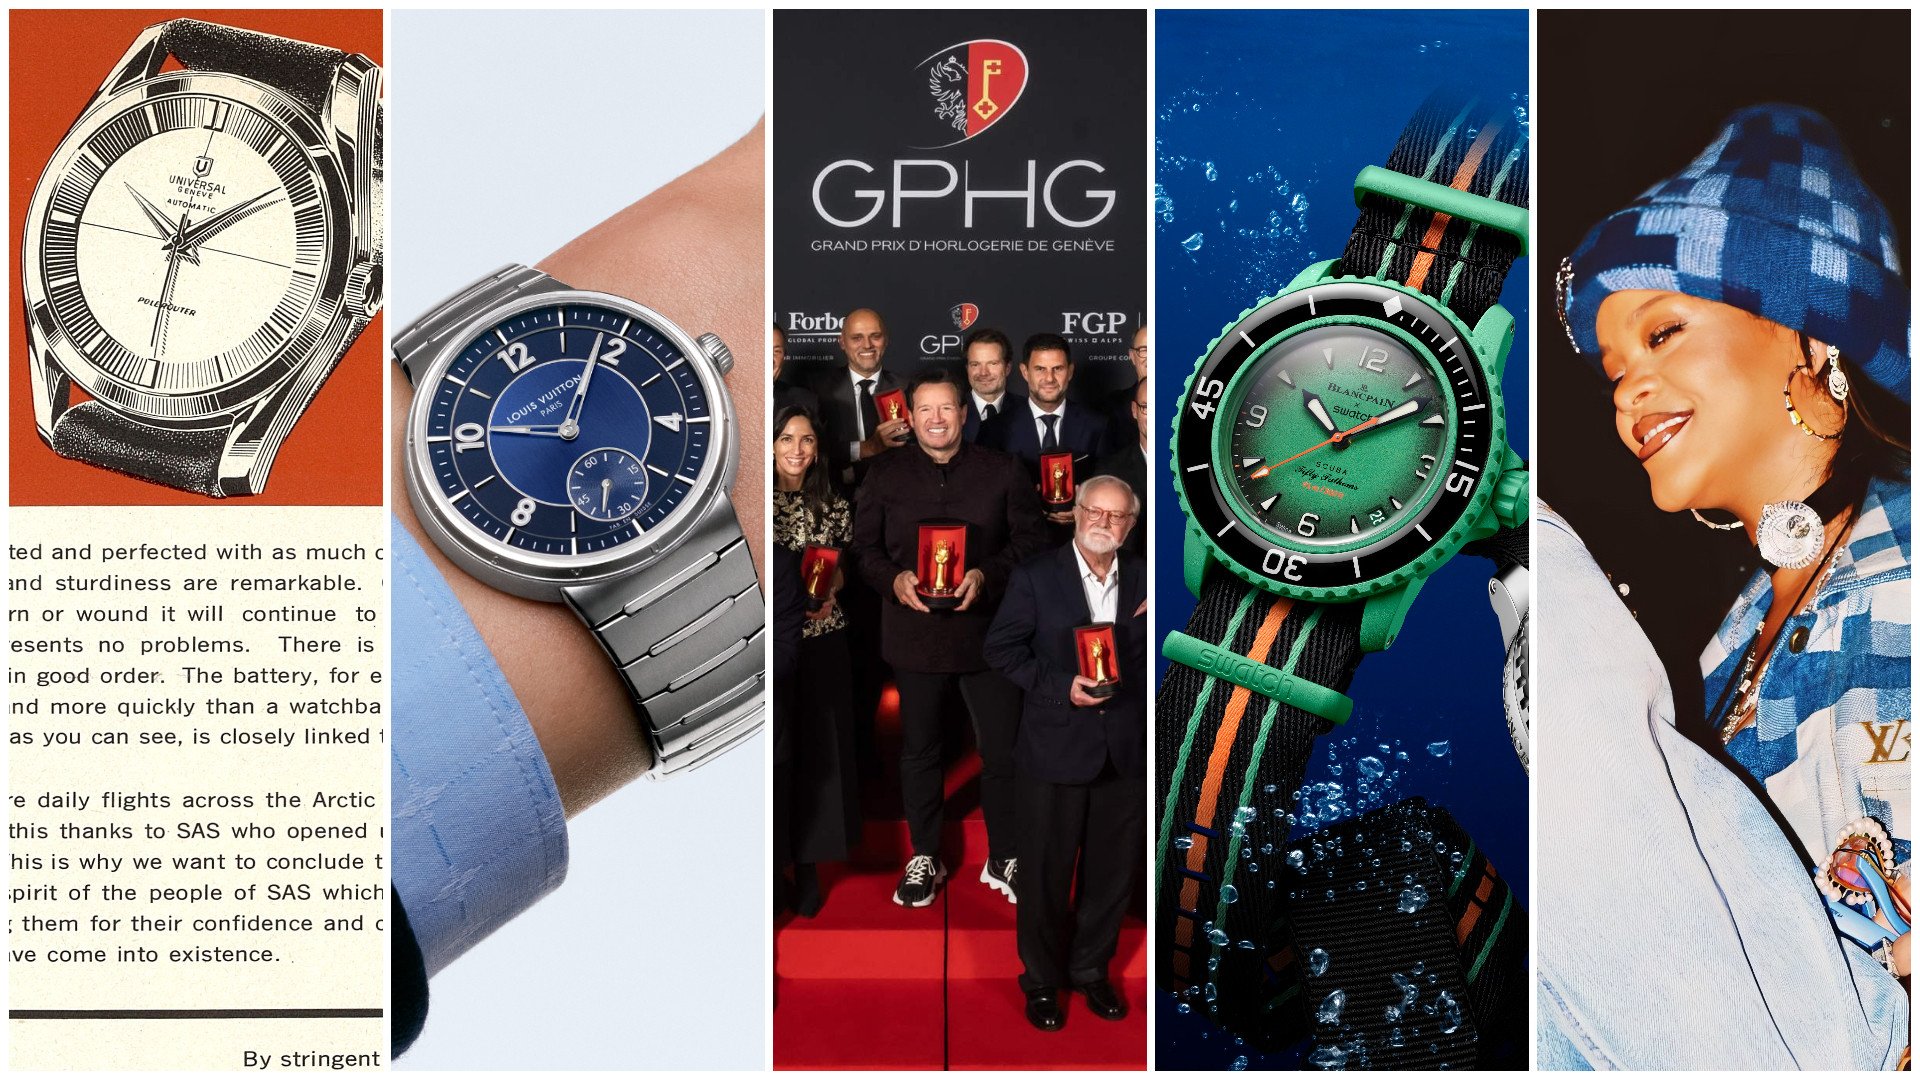 From left to right: Breitling SA buys Universal Geneve; Louis Vuitton releases the steel Tambour; GPHG celebrates the best in watchmaking this year; Blancpain collaborates with Swatch on the bioceramic Scuba Fifty Fathoms; Rihanna stuns at LV with a Jacob & Co “watch choker”